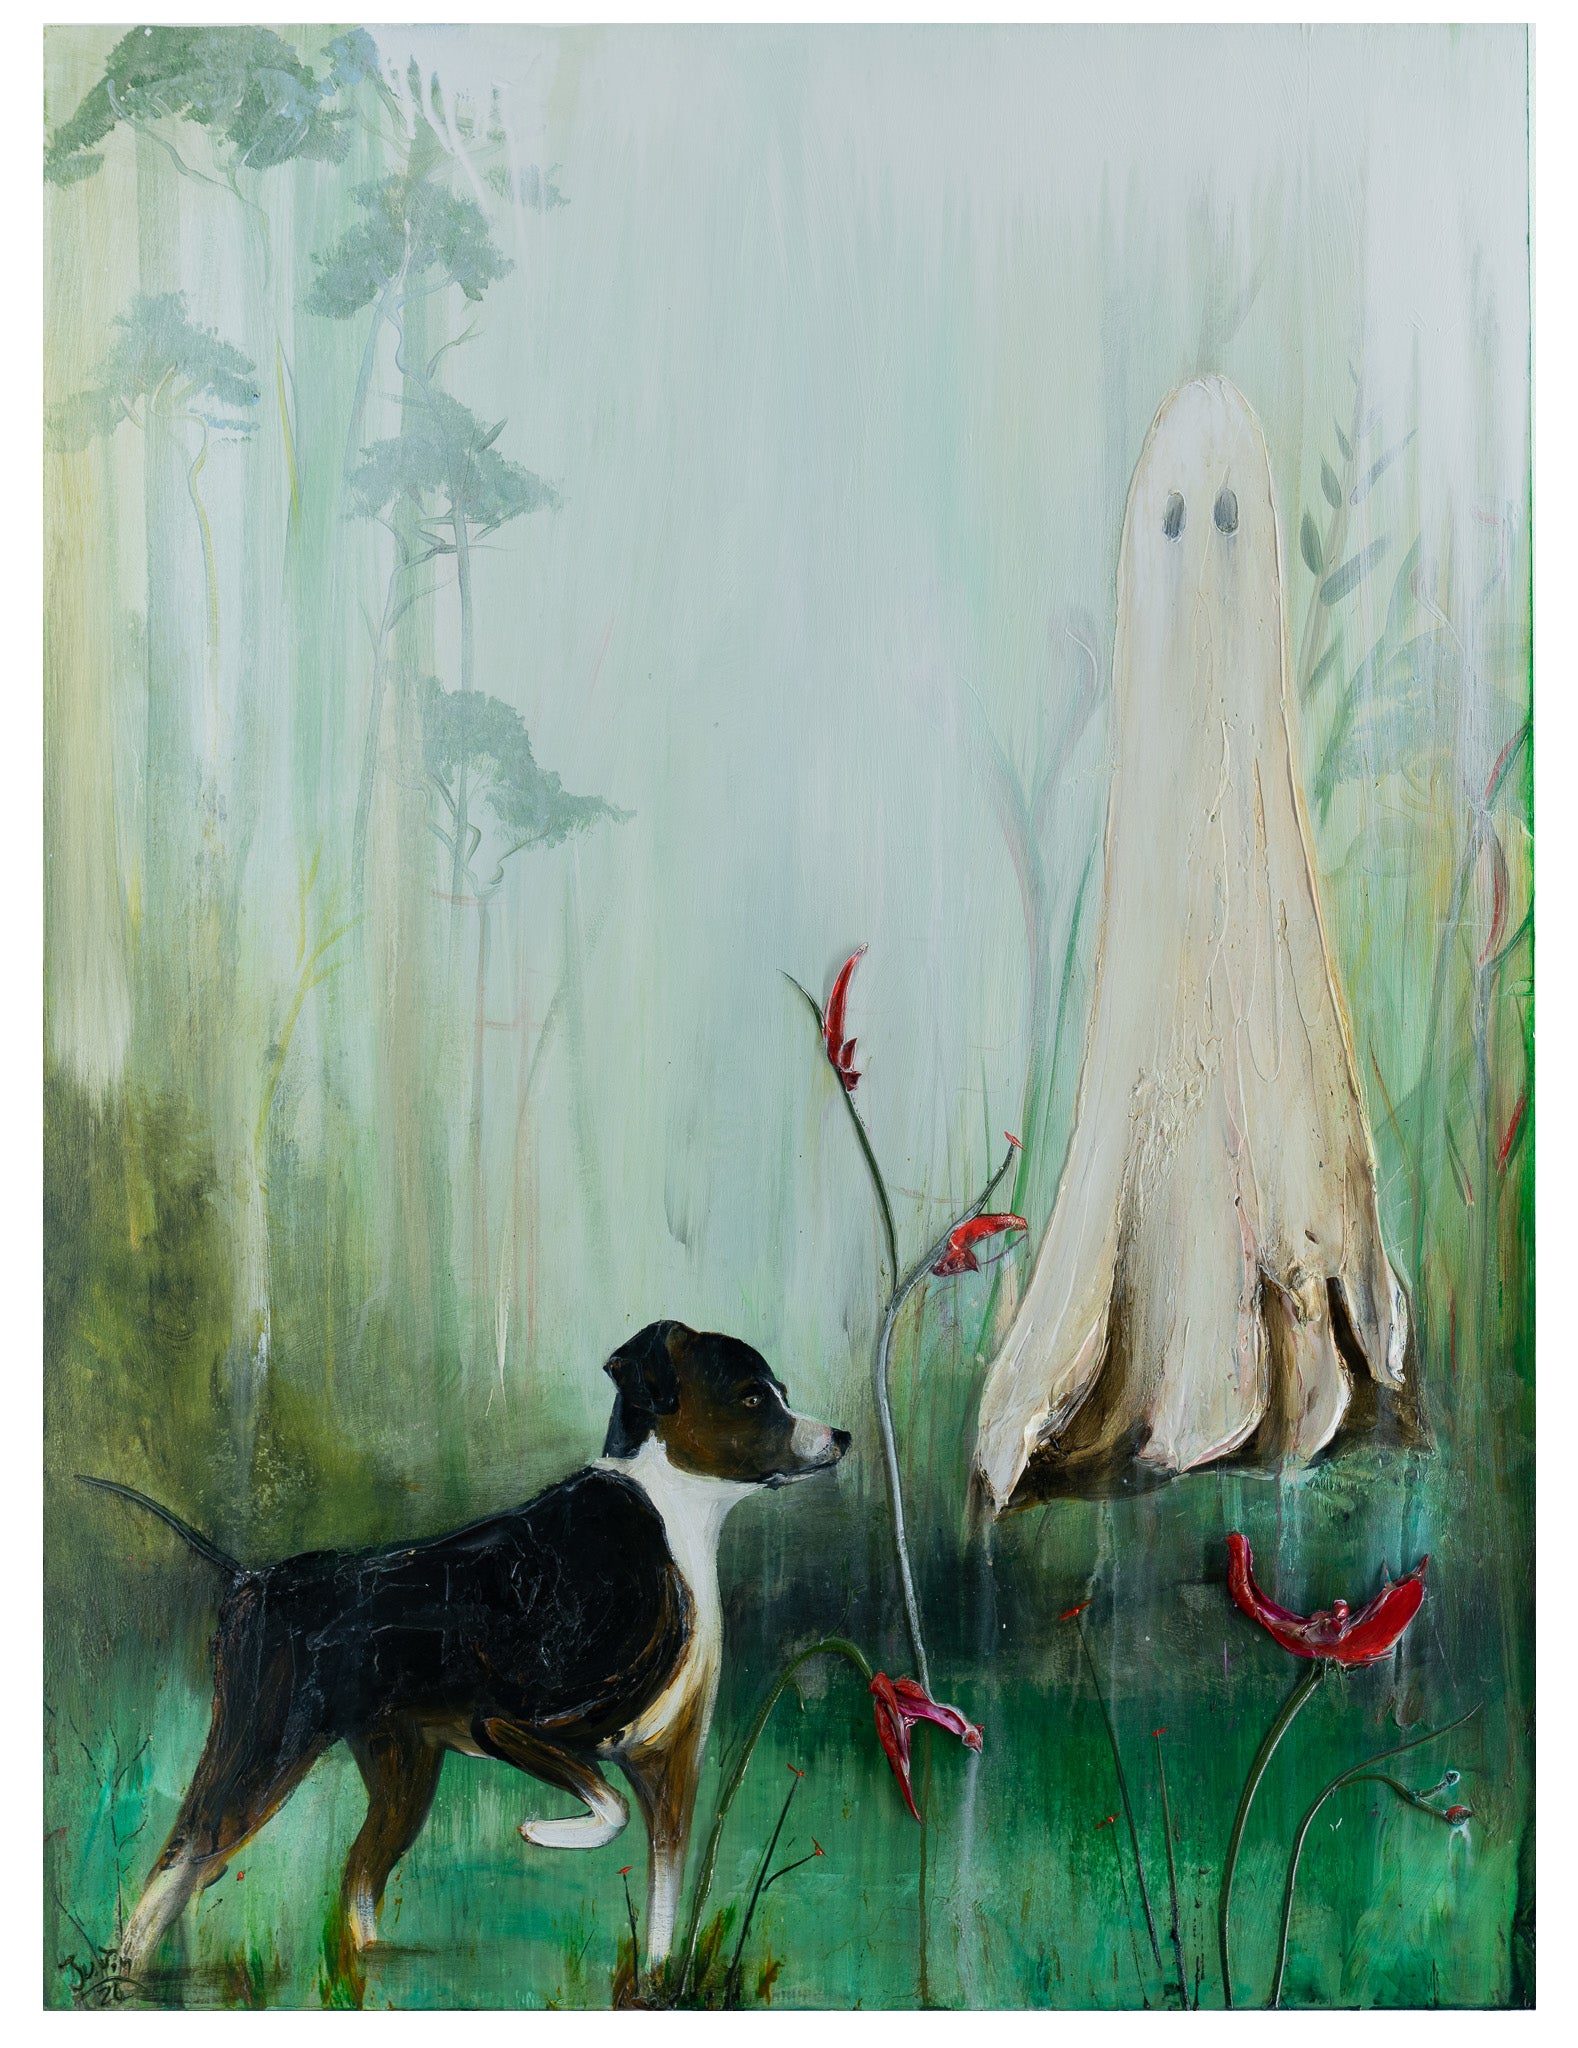 Jeremy Sees A Ghost, 36x48